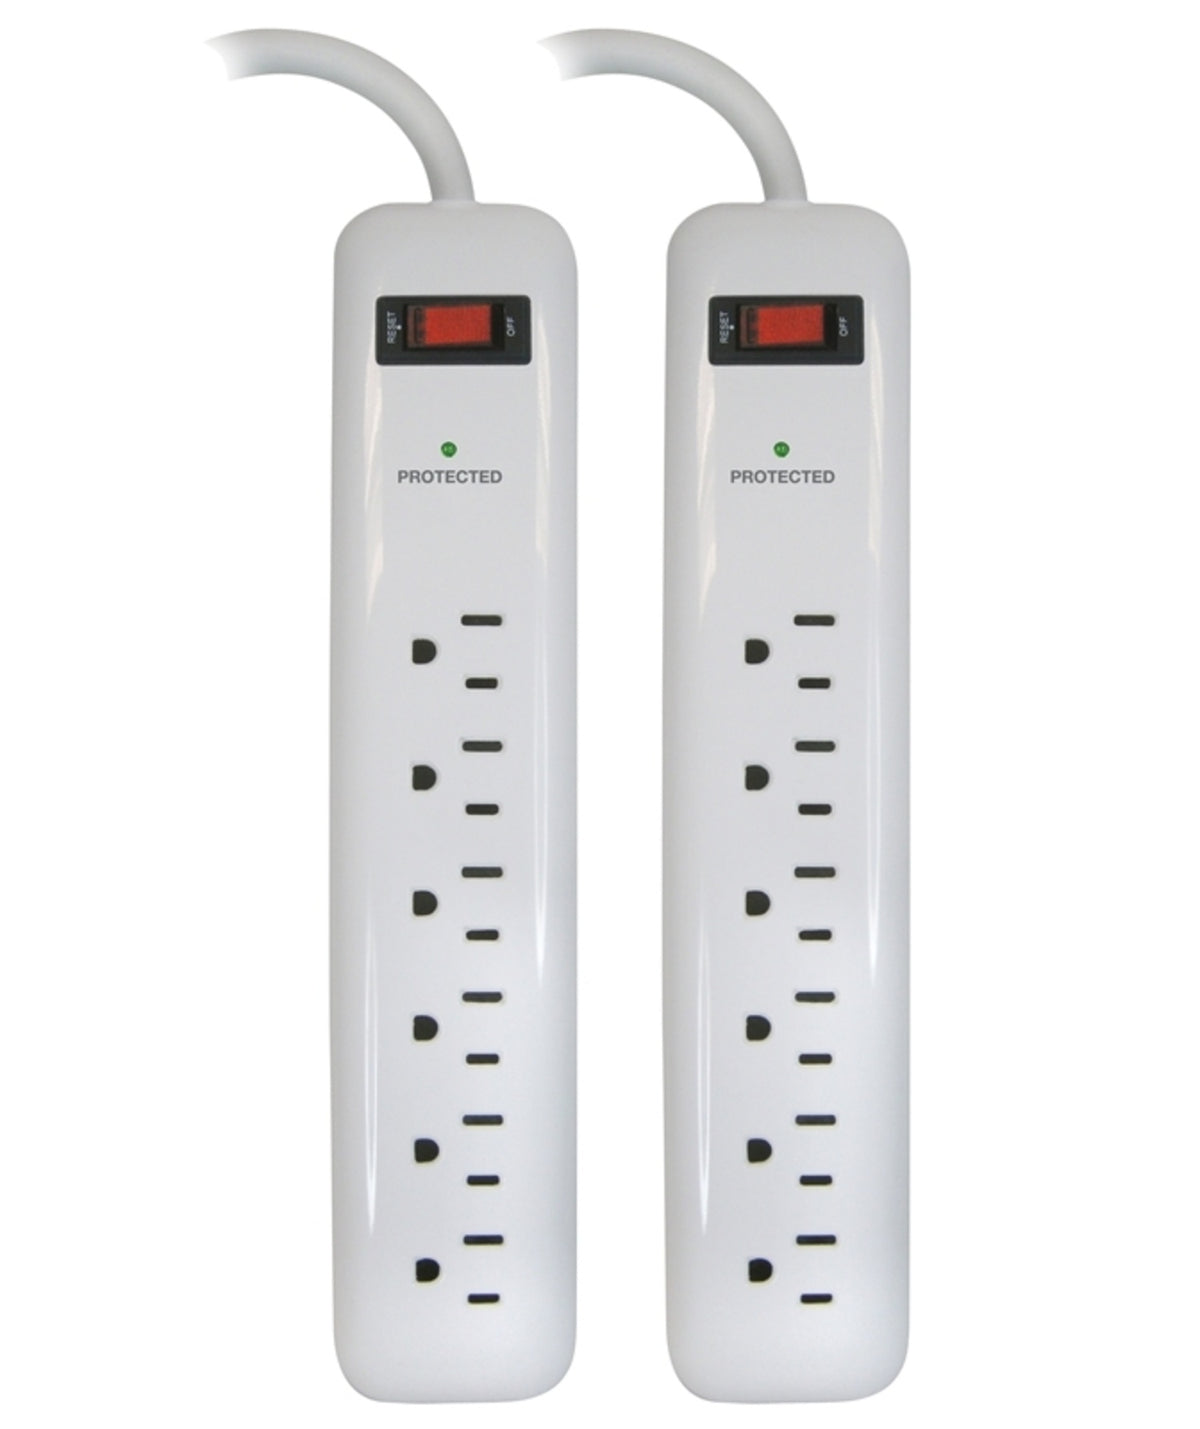 PowerZone OR2013X2 Surge Protector, 6 Outlet